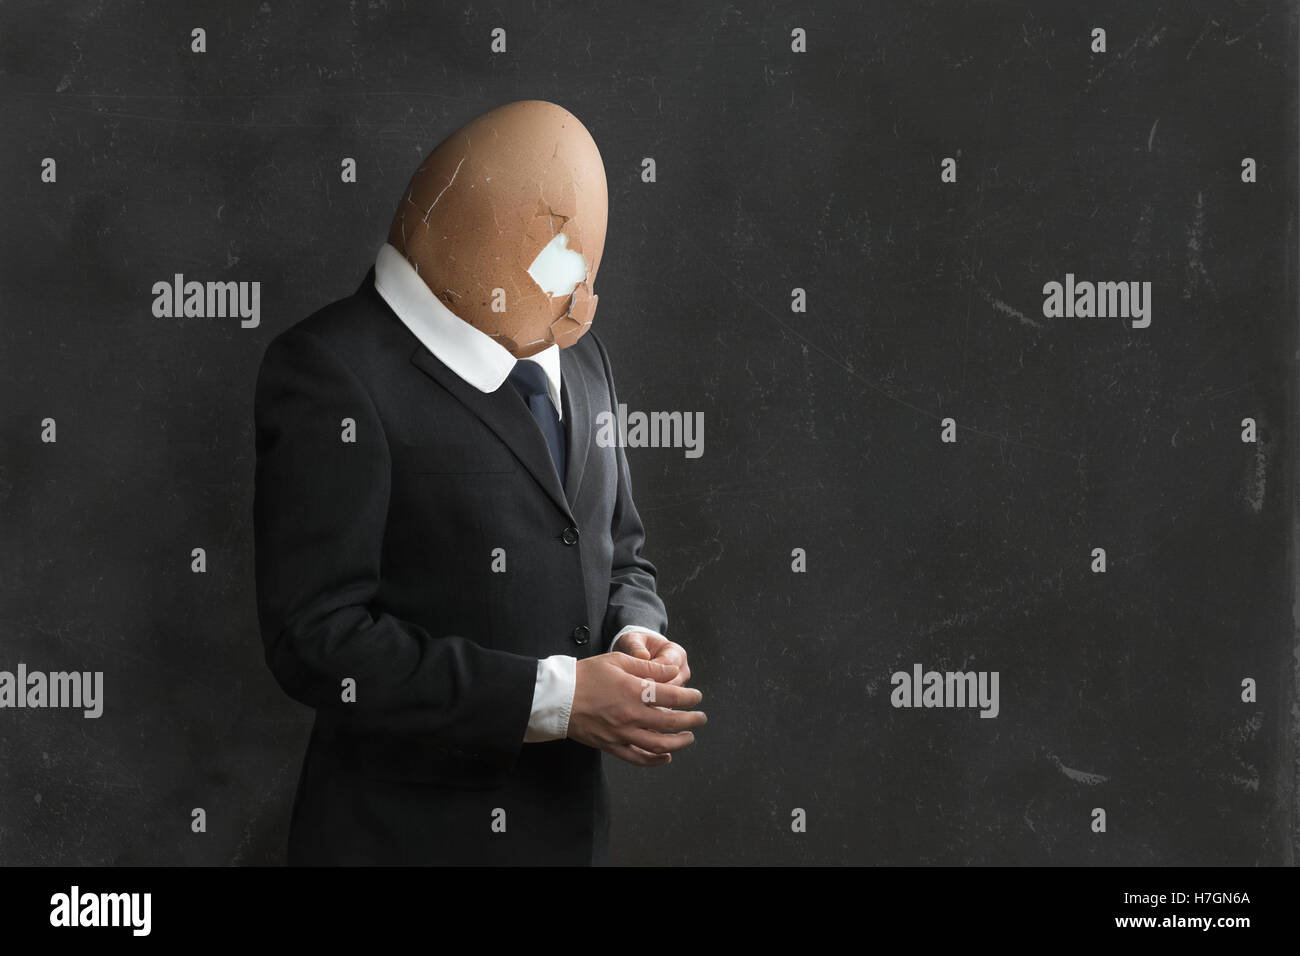 Businessman with broken Egghead and Suit Stock Photo